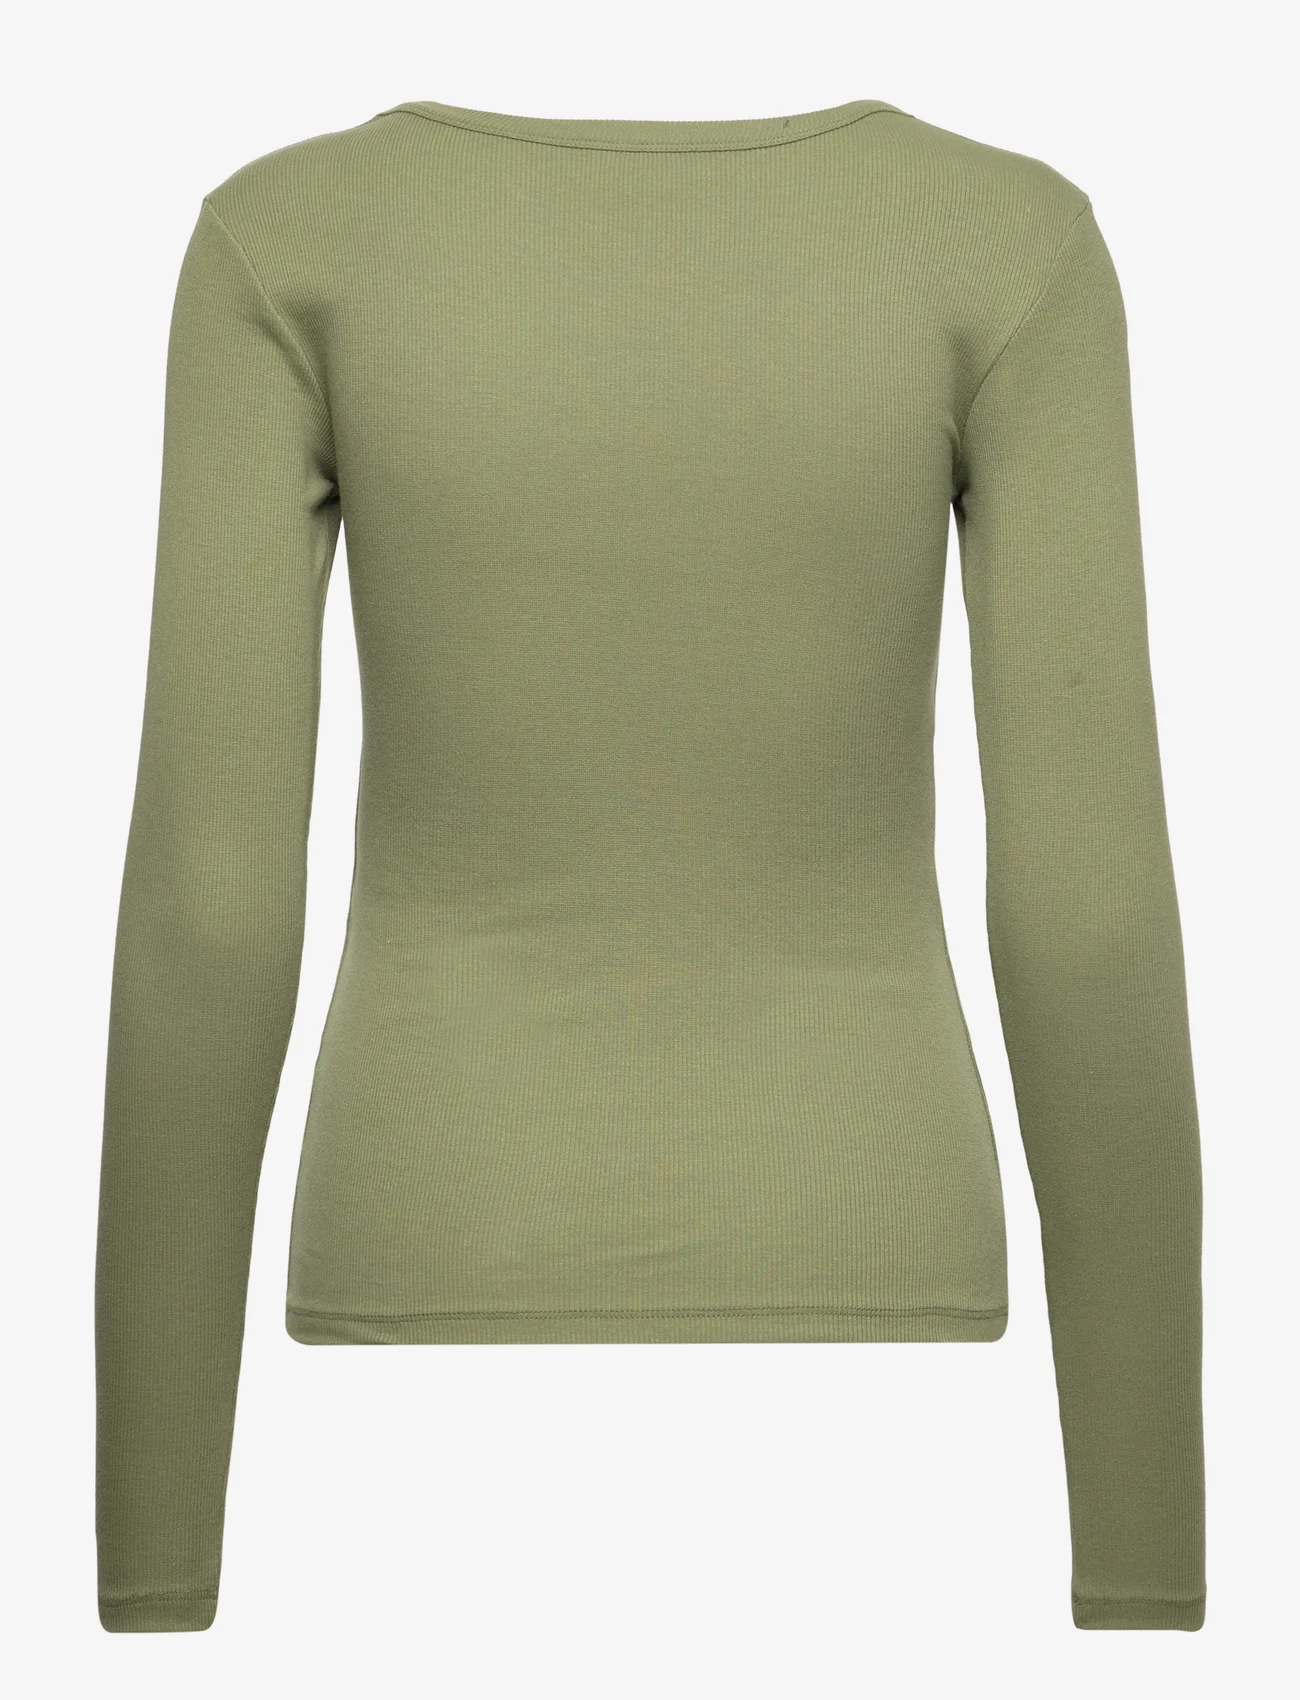 2NDDAY - 2ND Pale TT - Daily Cotton Rib - long-sleeved tops - olivine - 1